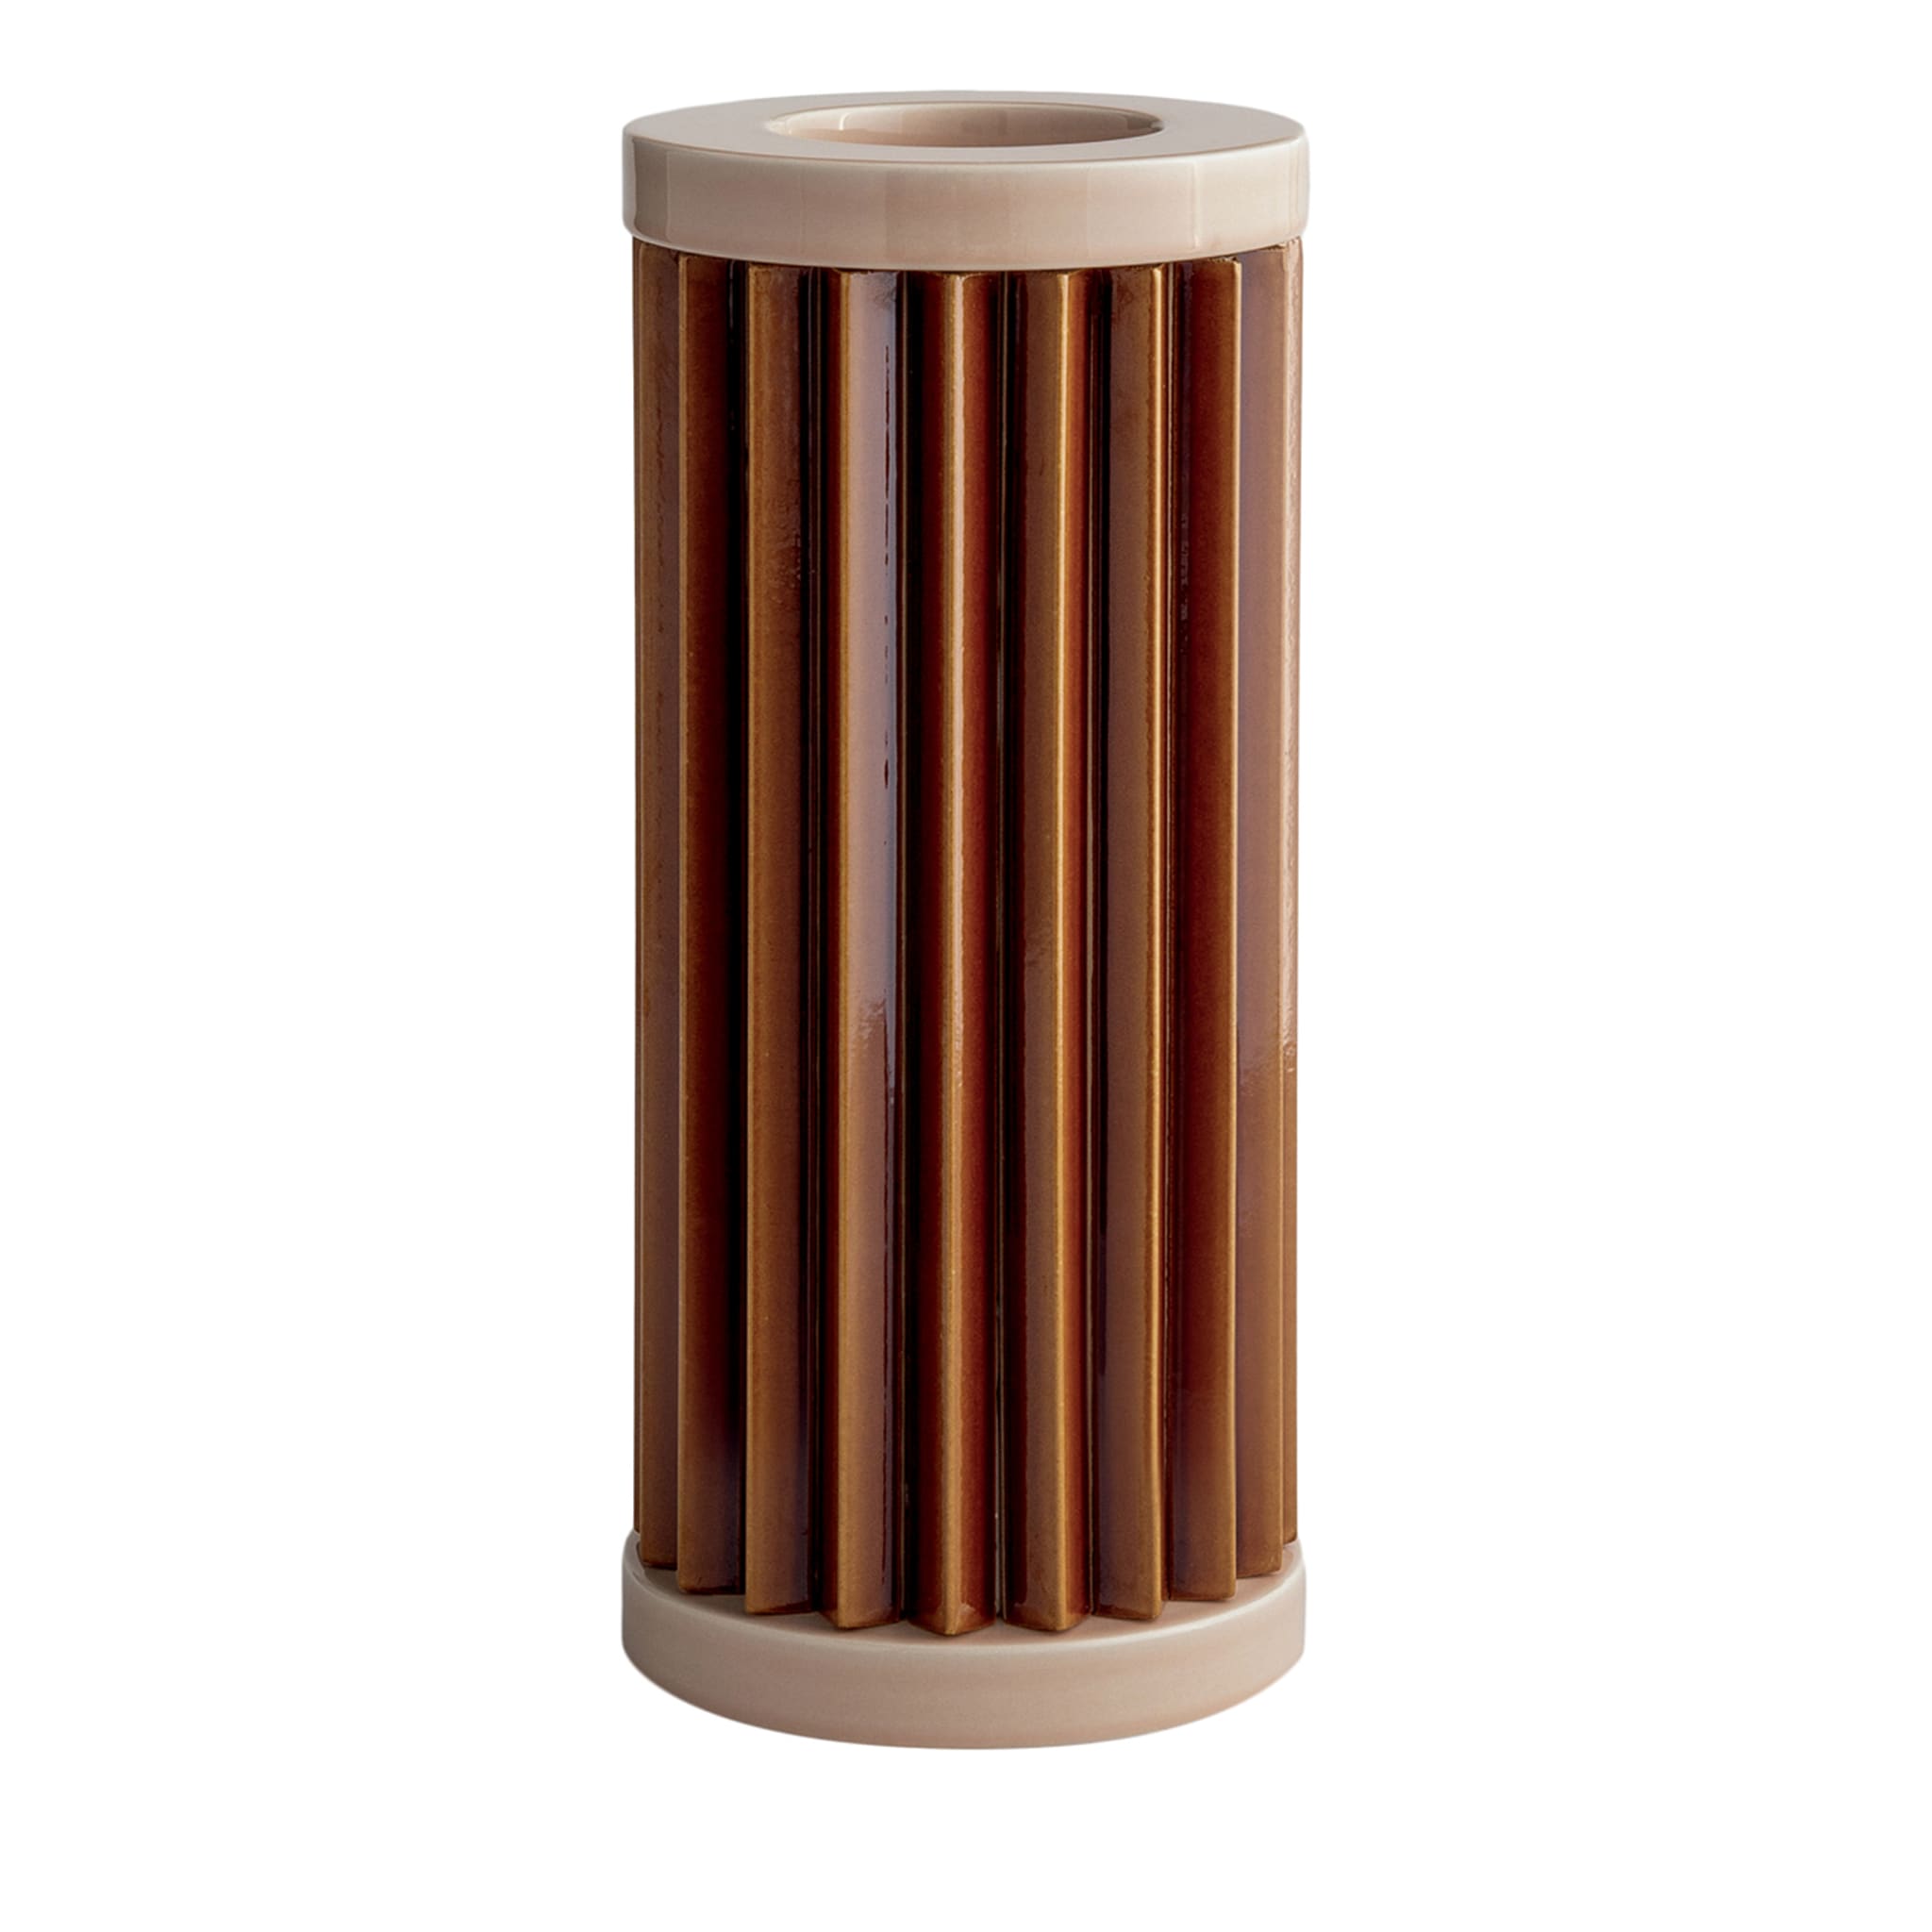 Rombini A Brown and Rose Vase by Ronan & Erwan Bouroullec - Main view